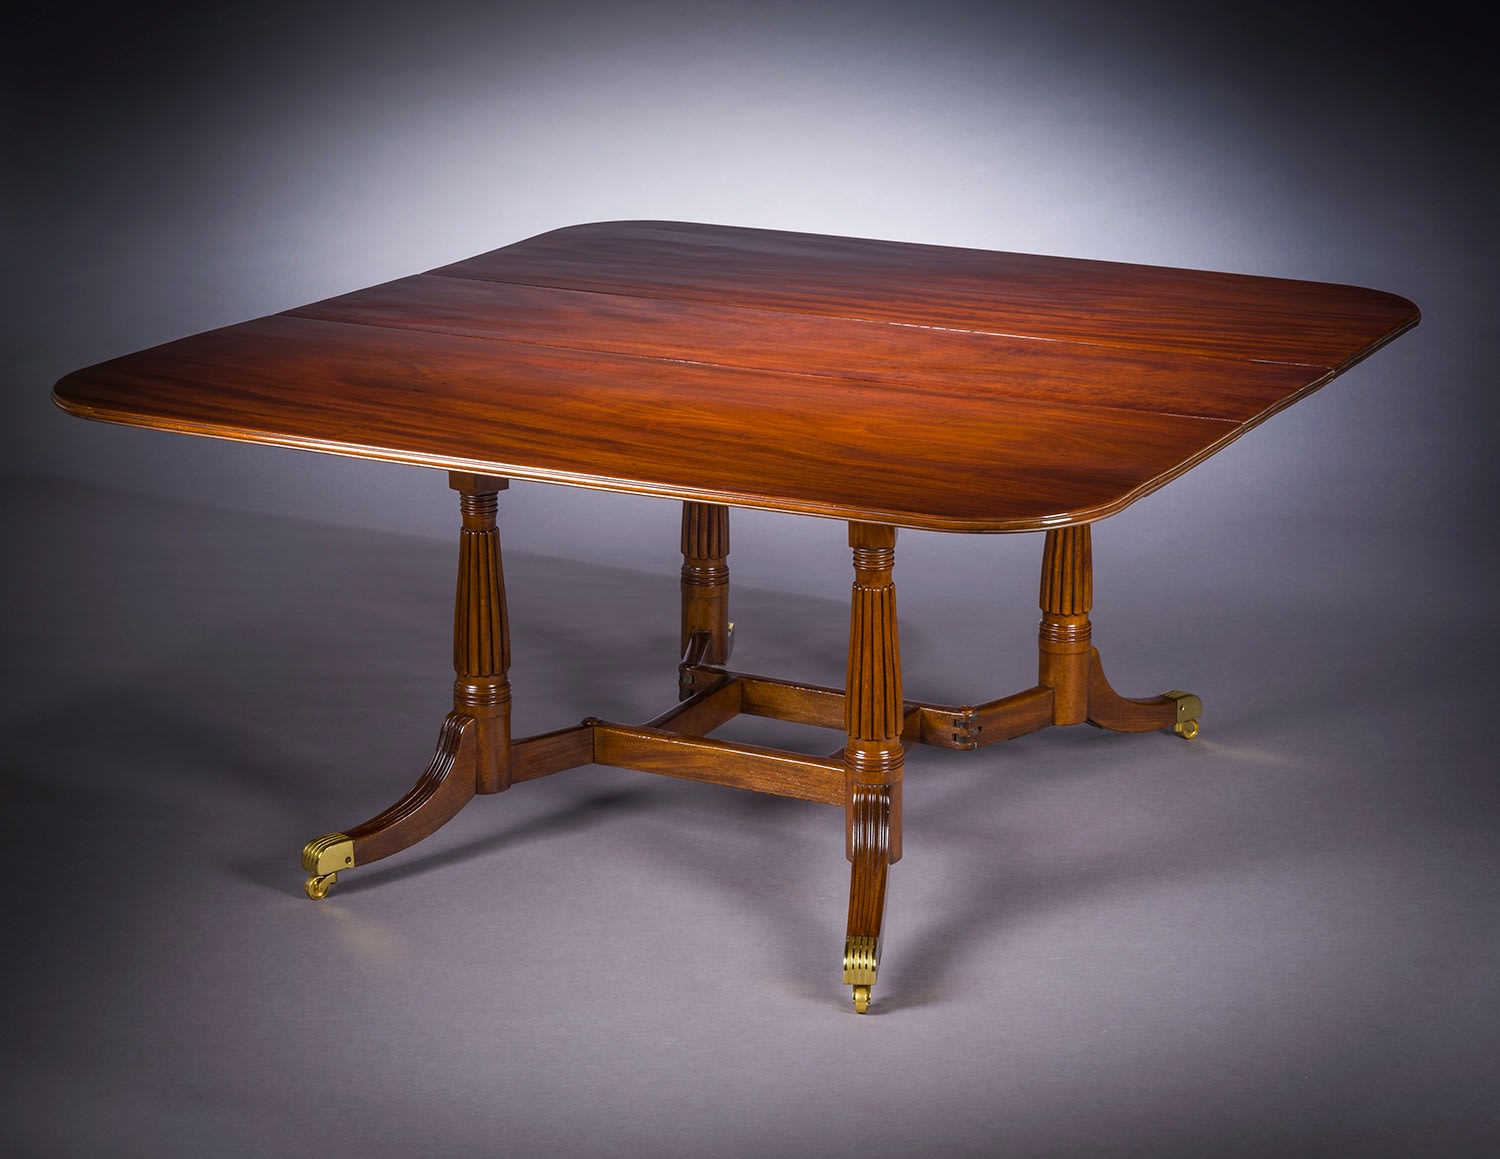 Cumberland-action Dining Table, about 1815&ndash;20. Attributed to Thomas Seymour, possibly for Isaac Vose, Boston. Mahogany, with gilt brass toe-caps and castors 28 3/4 in. high, 62 1/4 in. long, 60 in. wide; with leaves down, 17 in. wide, 62 1/4 in. long